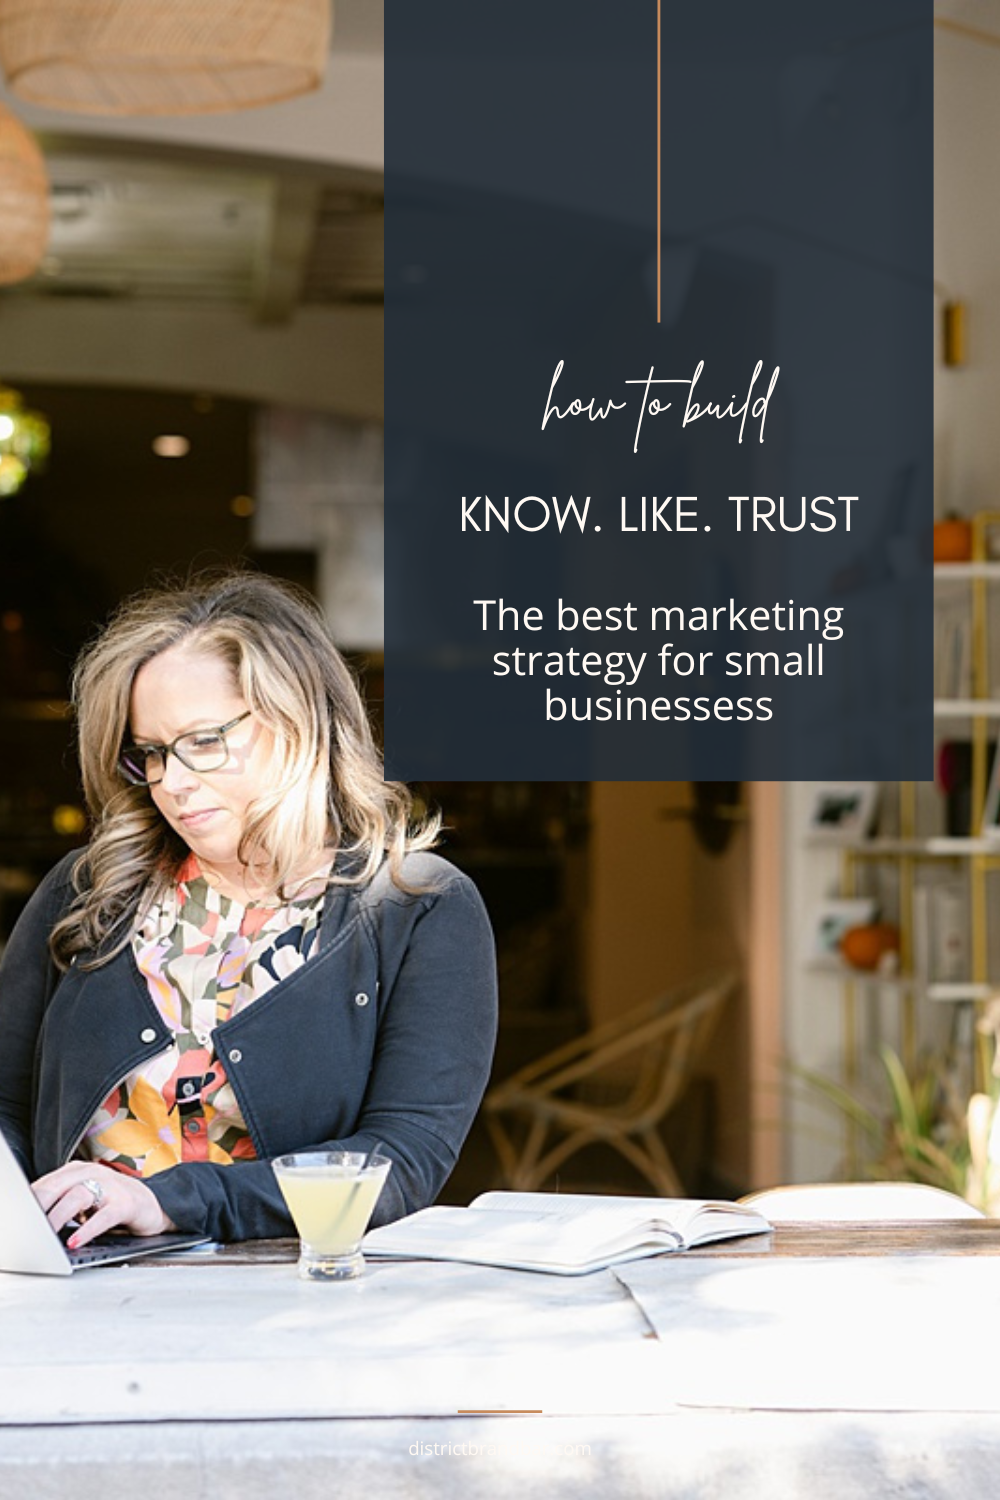 Move Your Audience Through the Know, Like, Trust Path